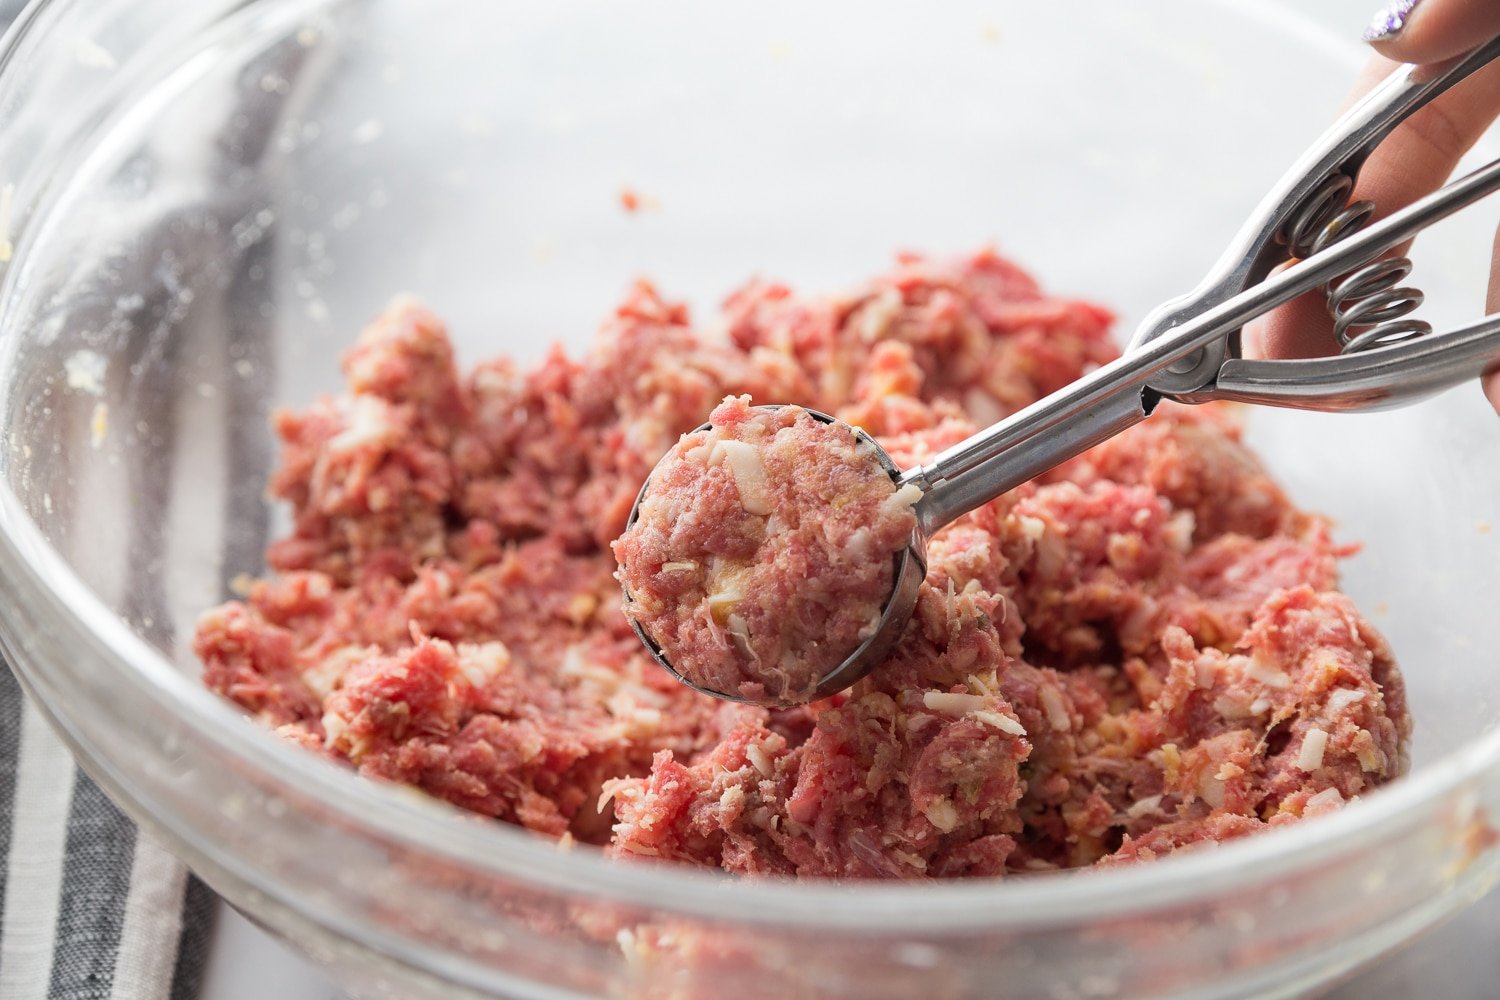 the meatball mixture being scooped out in a cookie scoop 